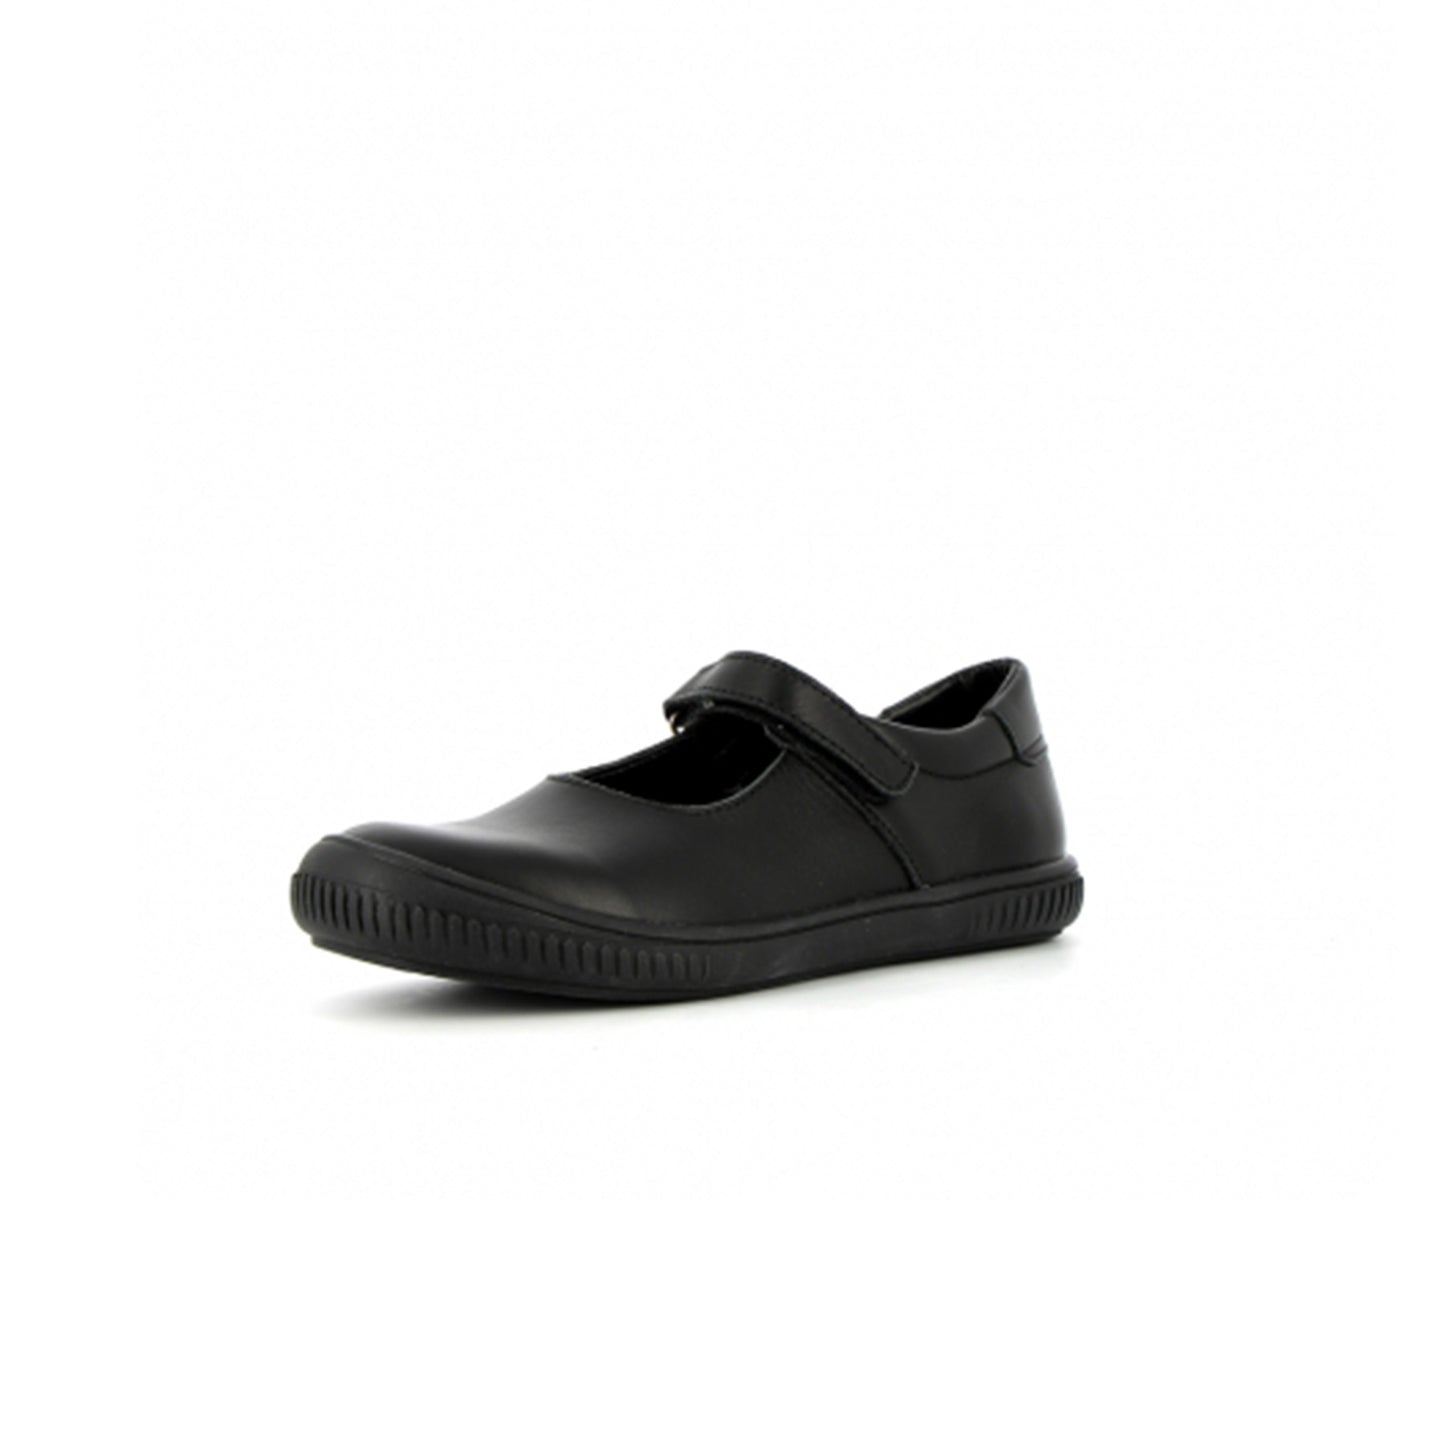 Bopy Sefacan Black Mary Janes